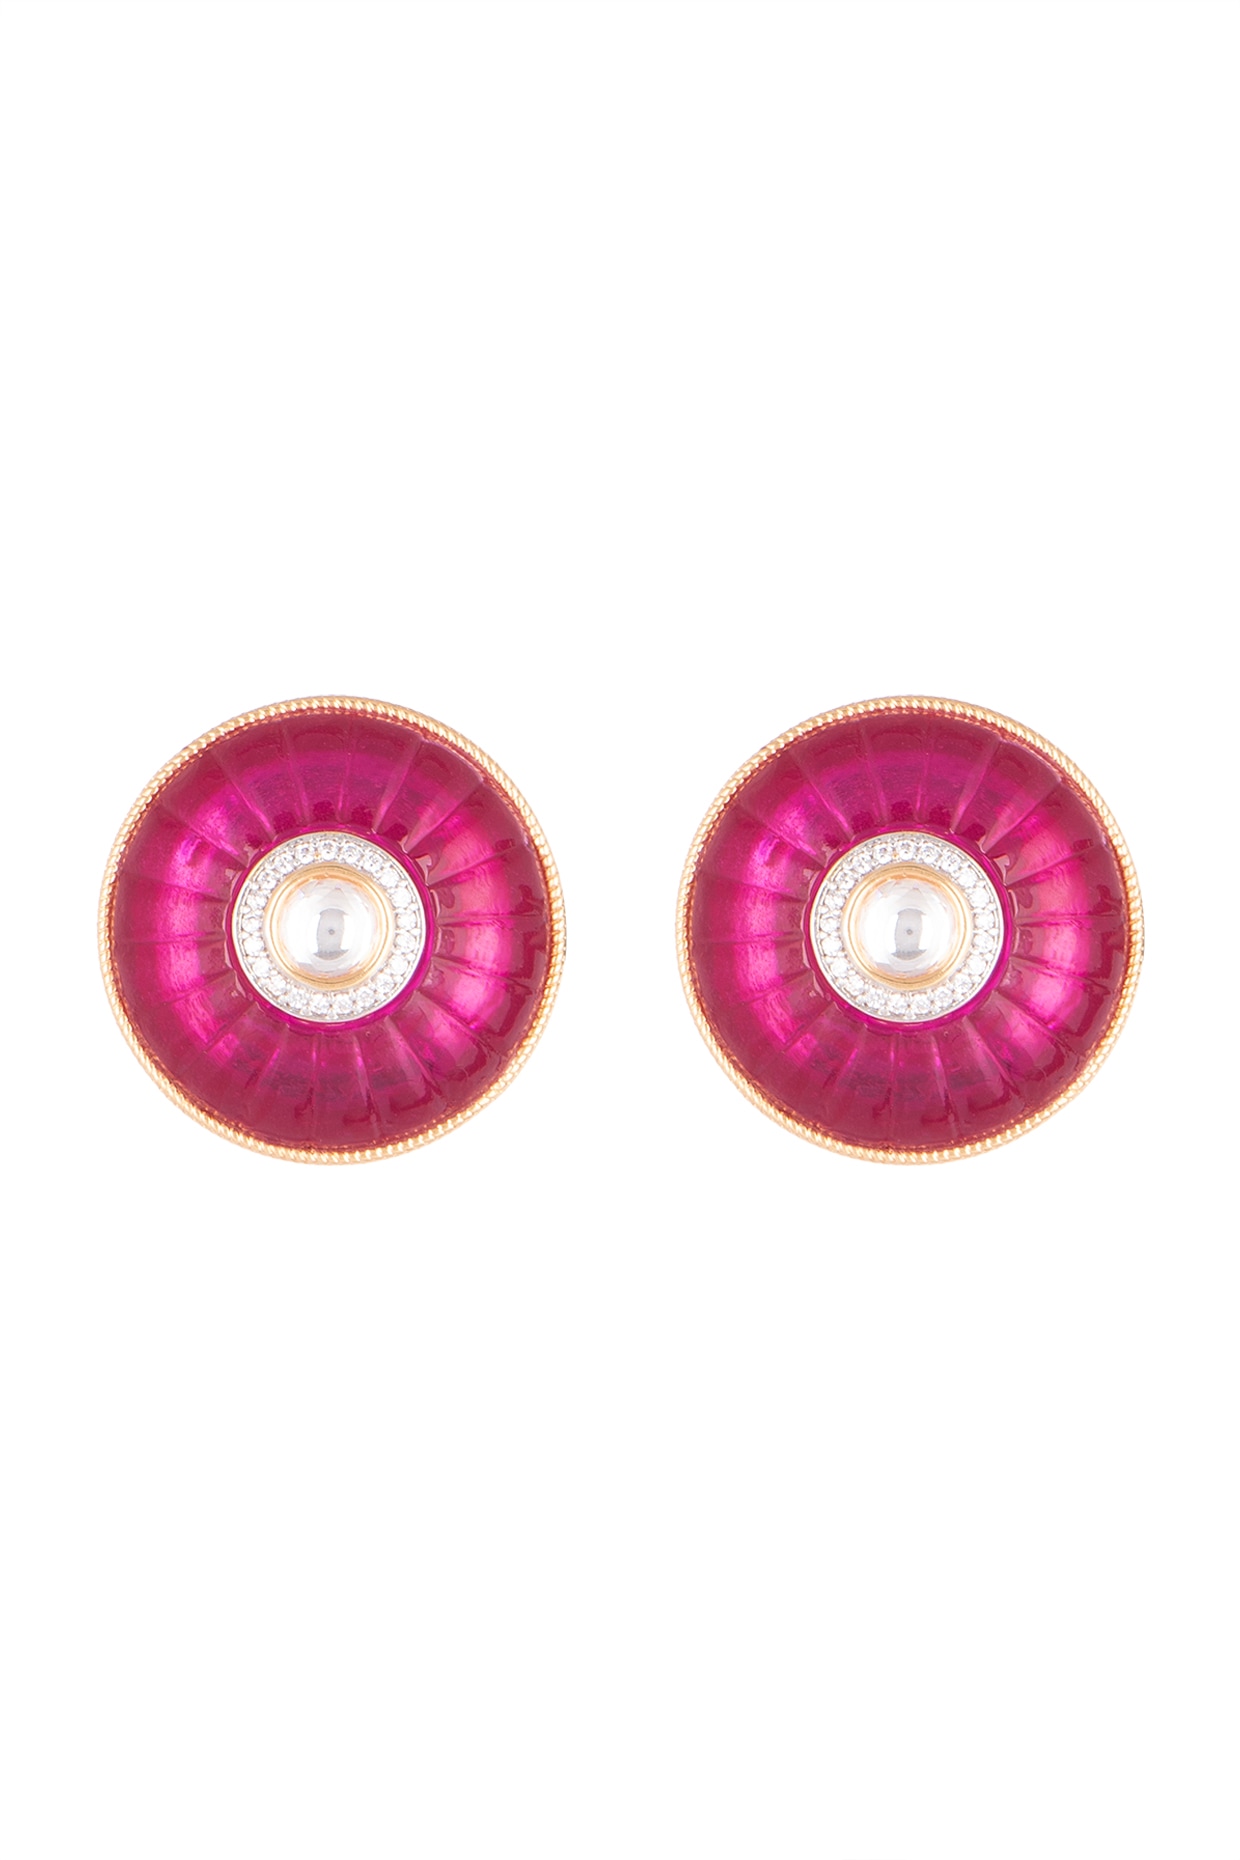 Pink Earrings Online Shopping for Women at Low Prices